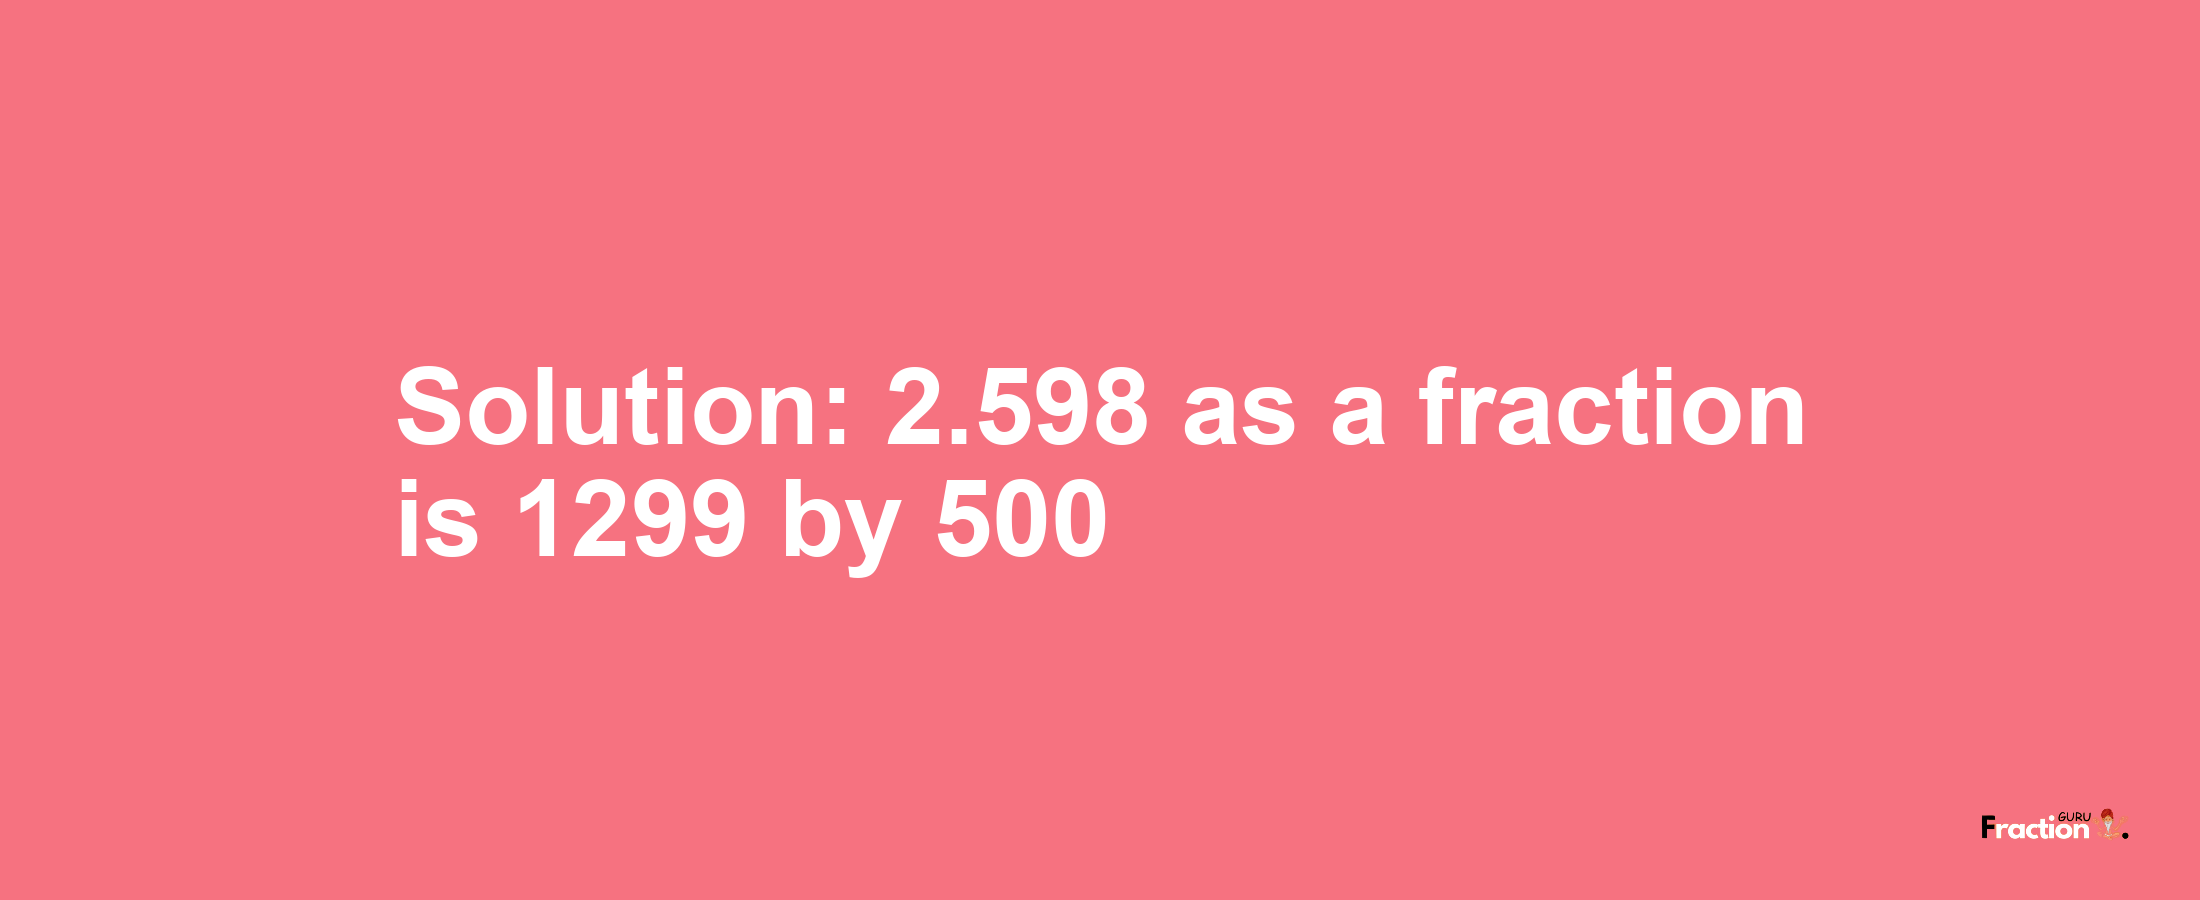 Solution:2.598 as a fraction is 1299/500